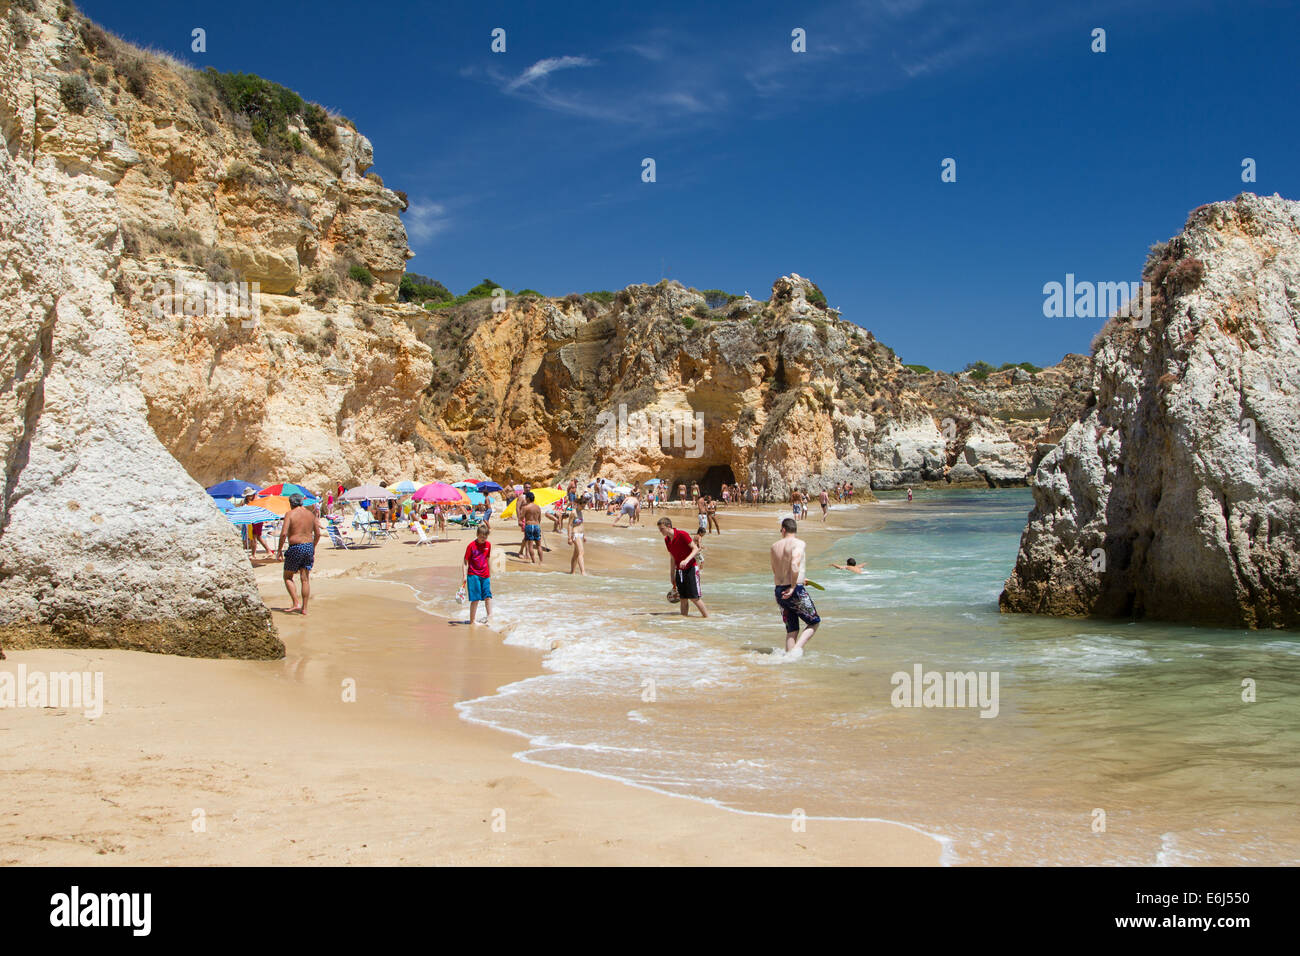 People enjoying a sunny day on the beach in Alvor Portugal, the beach is sheltered by sandstone cliffs. Stock Photo